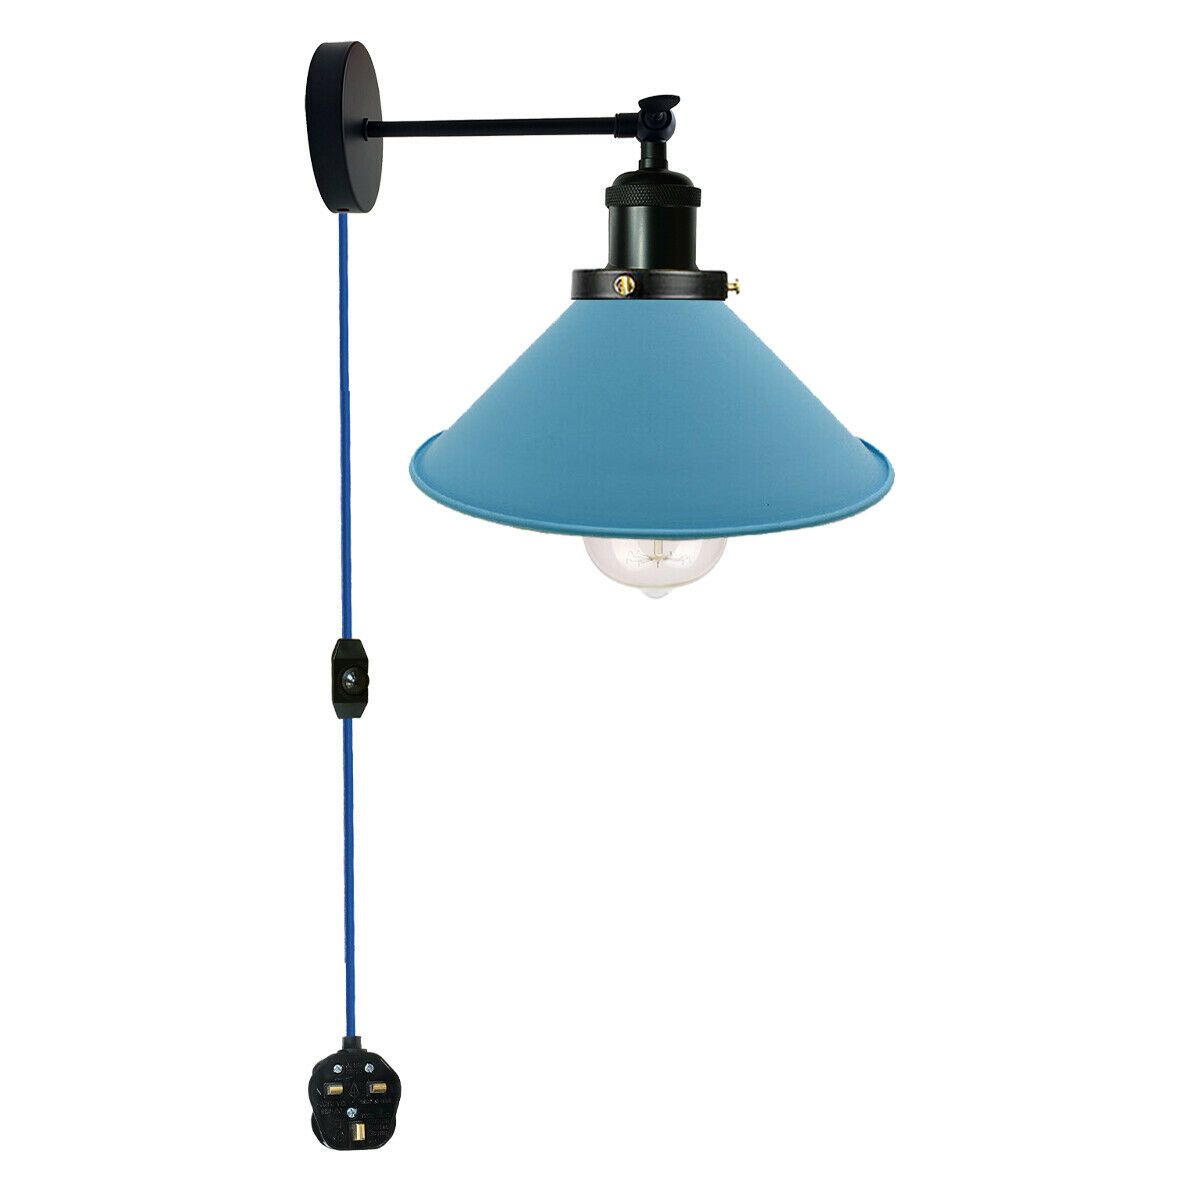 Vintage Blue Cone Lamp Shade-E27 Holder & Plug-In Dimmer Switch